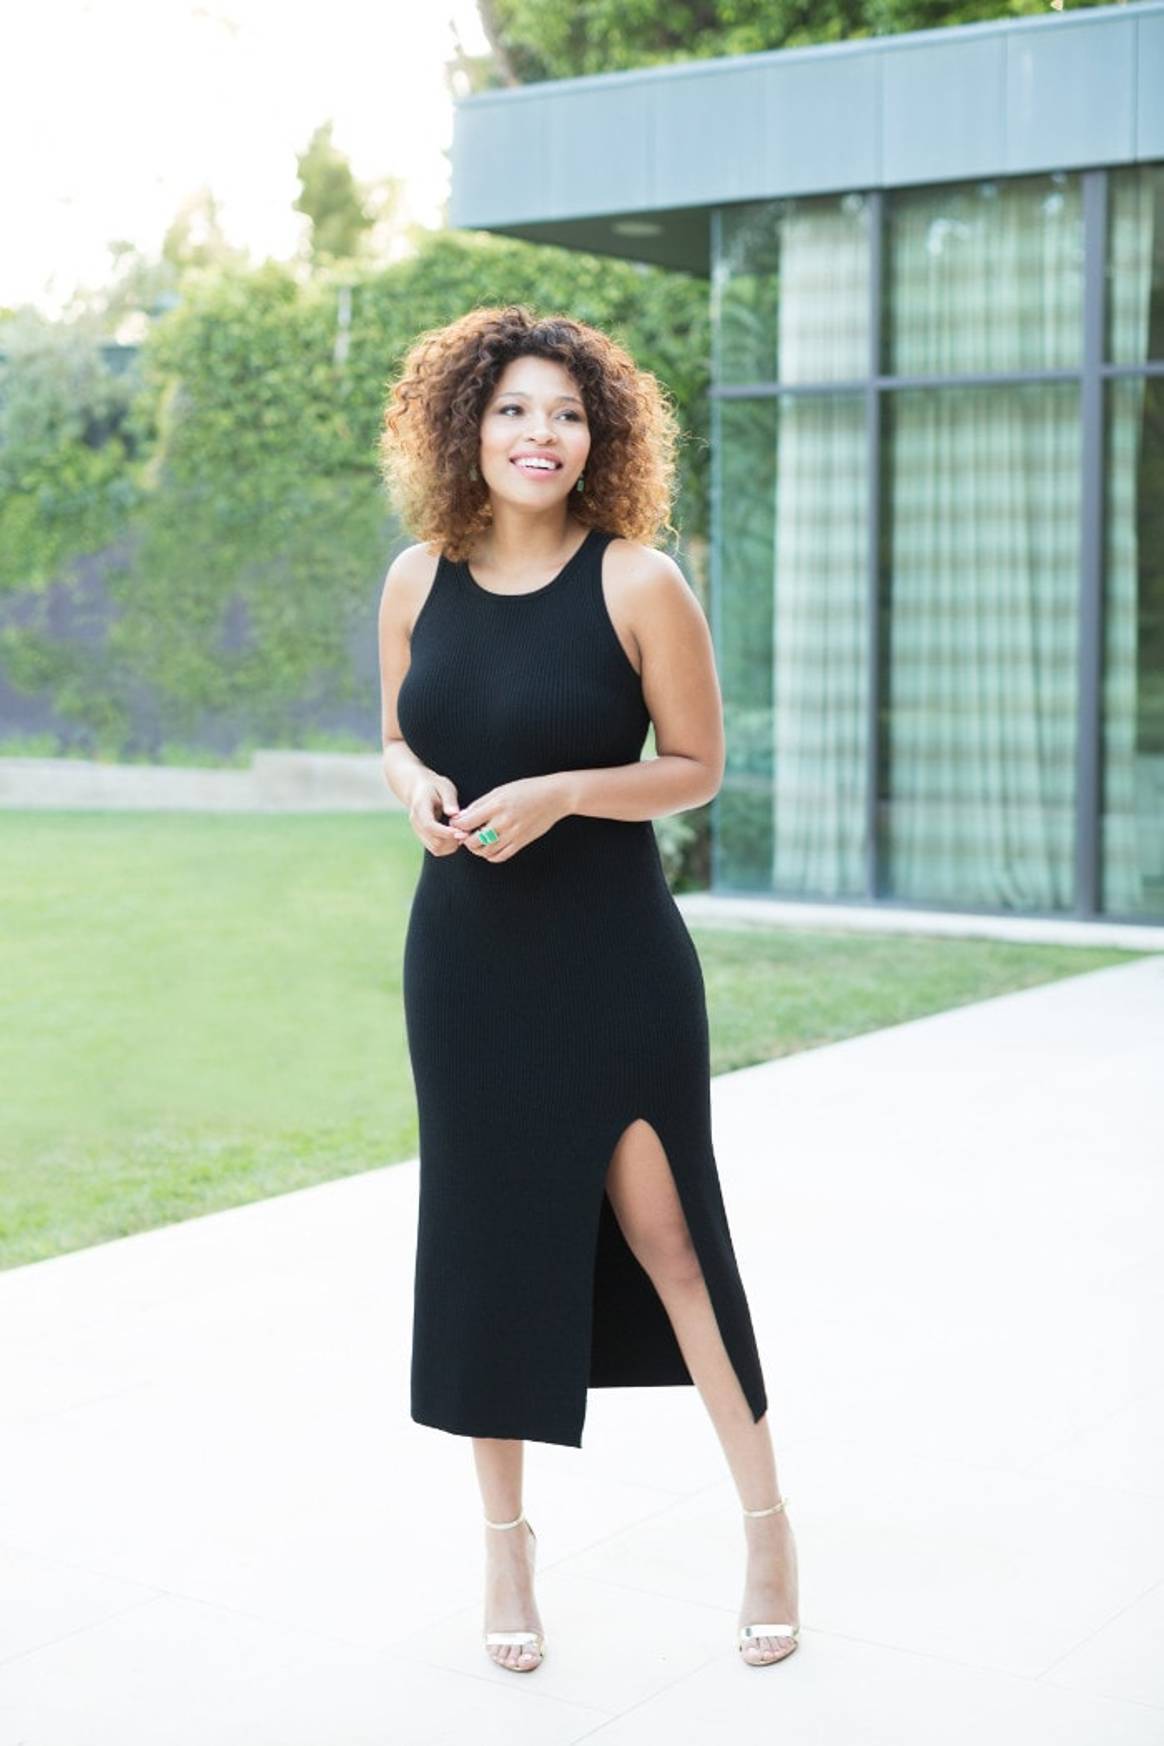 11 Honoré aims to fill the gap in plus-size luxury e-commerce